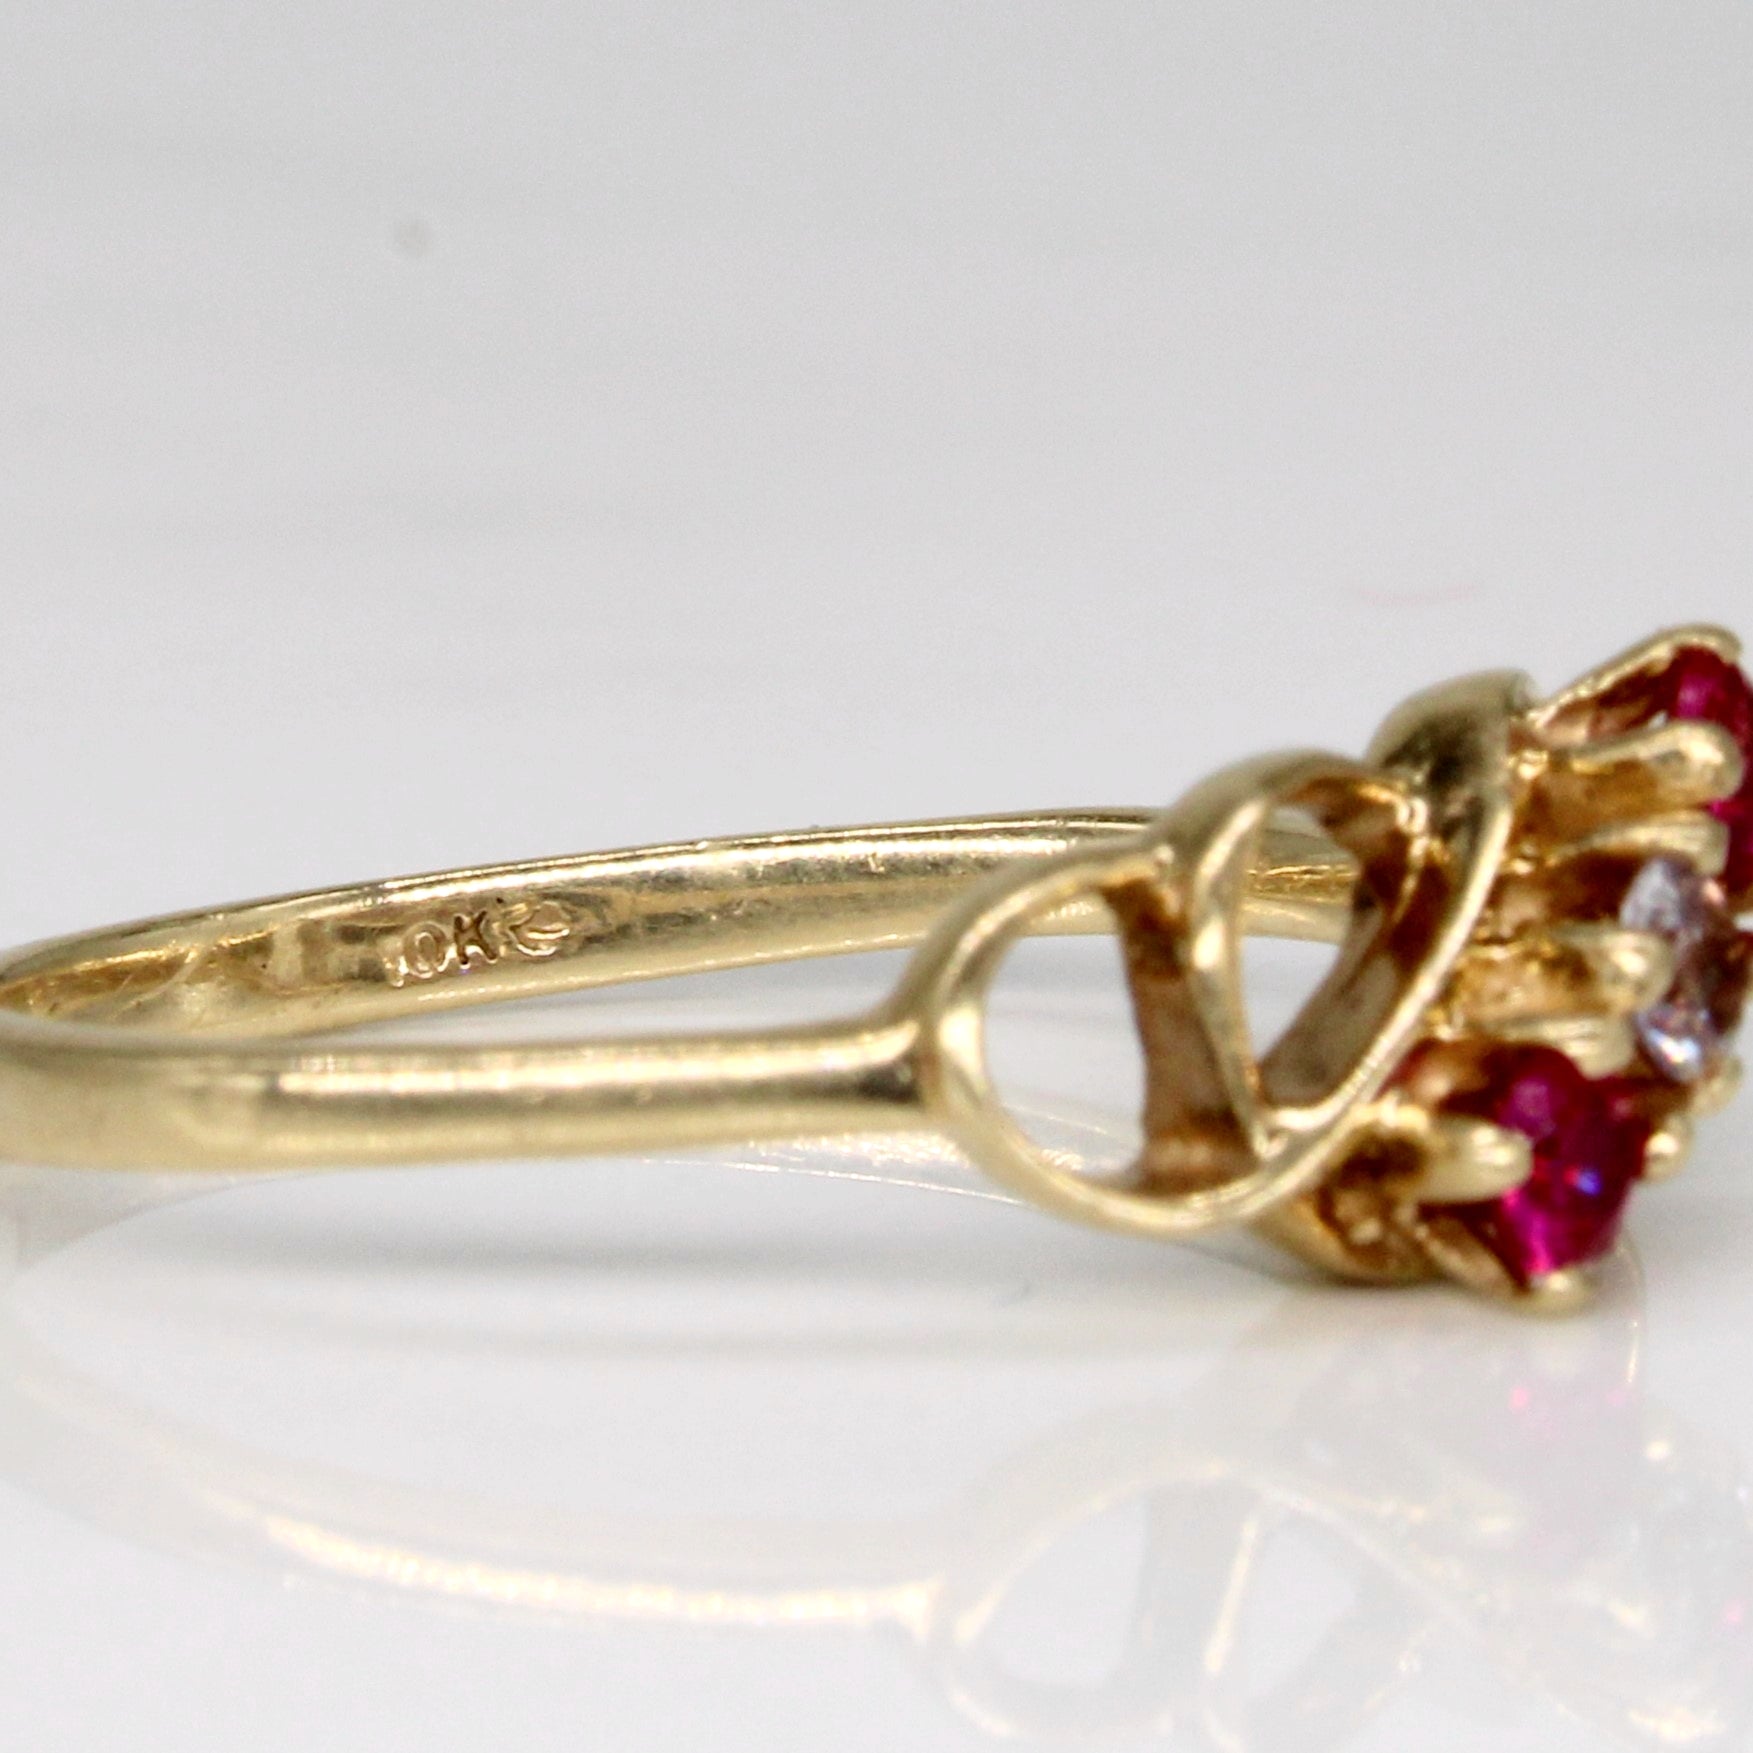 Synthetic Ruby & Clear Sapphire Waterfall Ring | 0.10ctw, 0.05ct | SZ 5.75 |